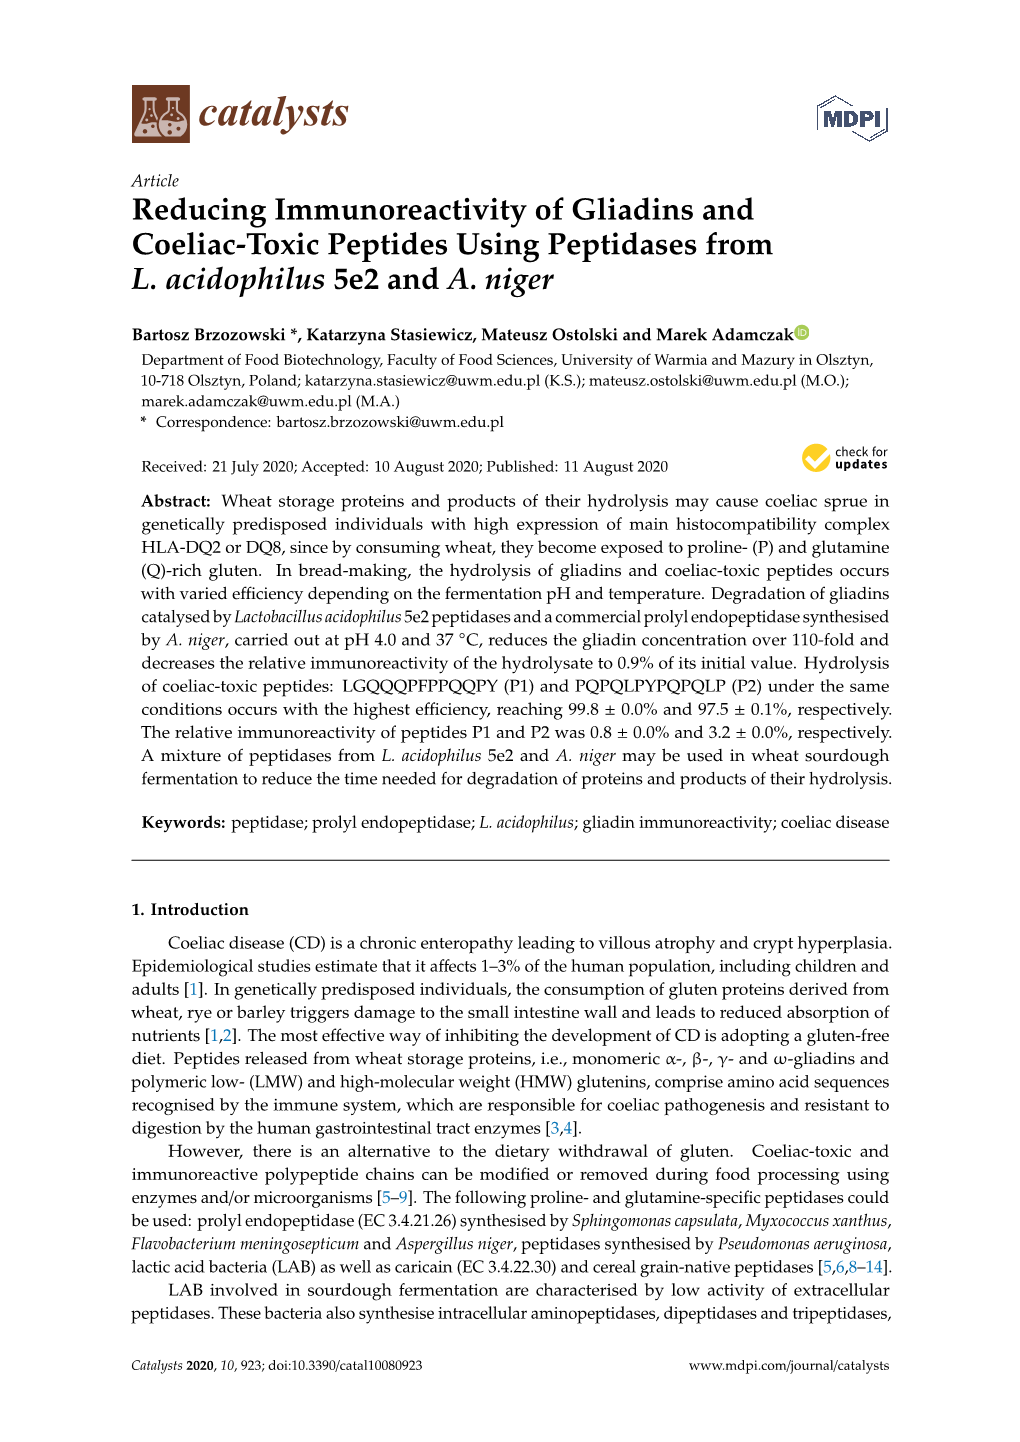 Reducing Immunoreactivity of Gliadins and Coeliac-Toxic Peptides Using Peptidases from L